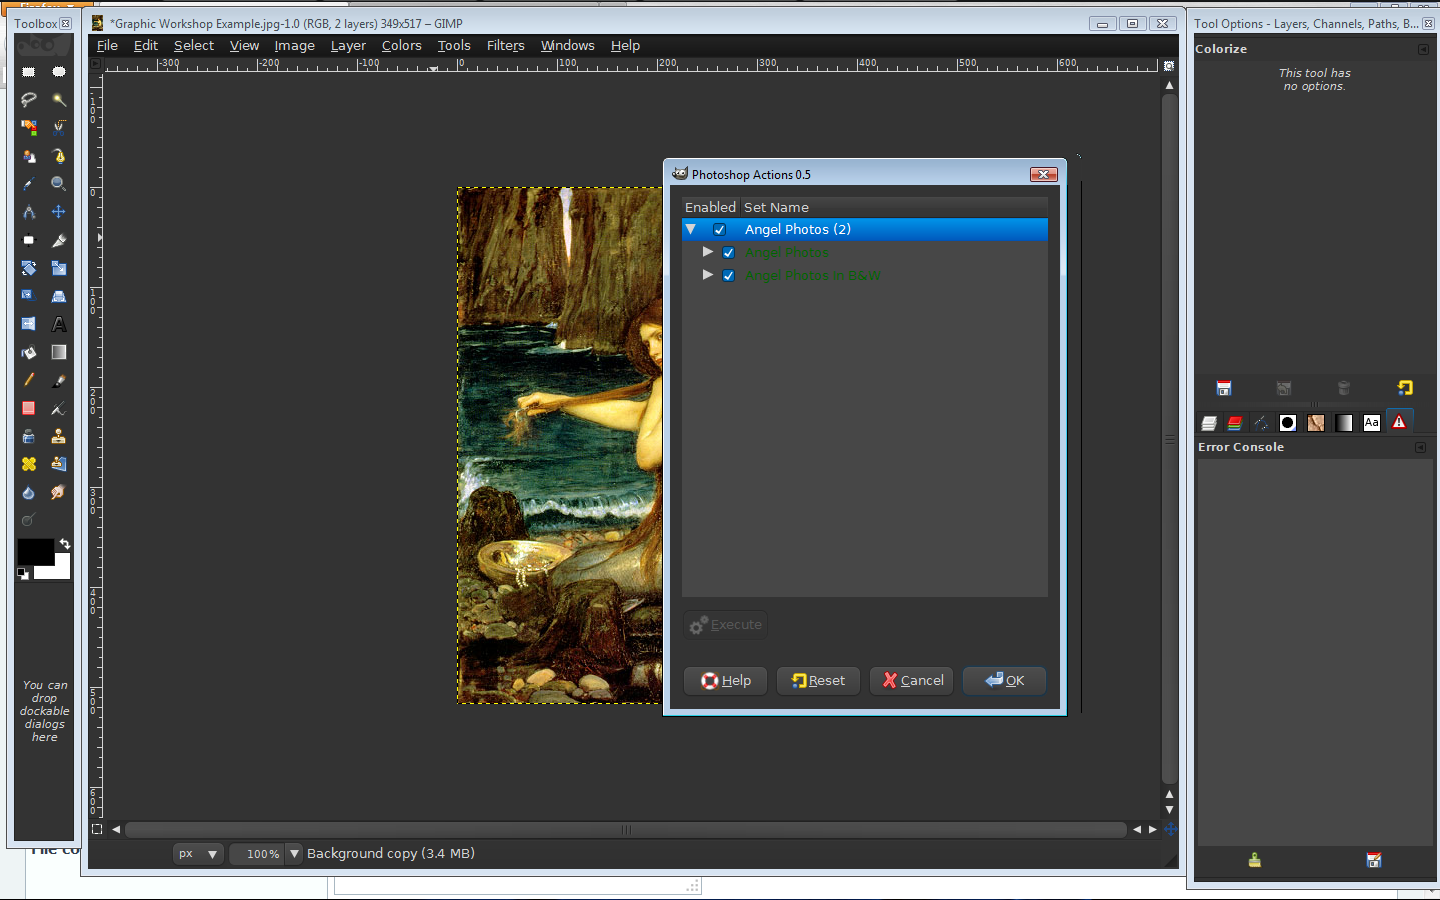 gif animation software free download full version for windows xp - photo #38